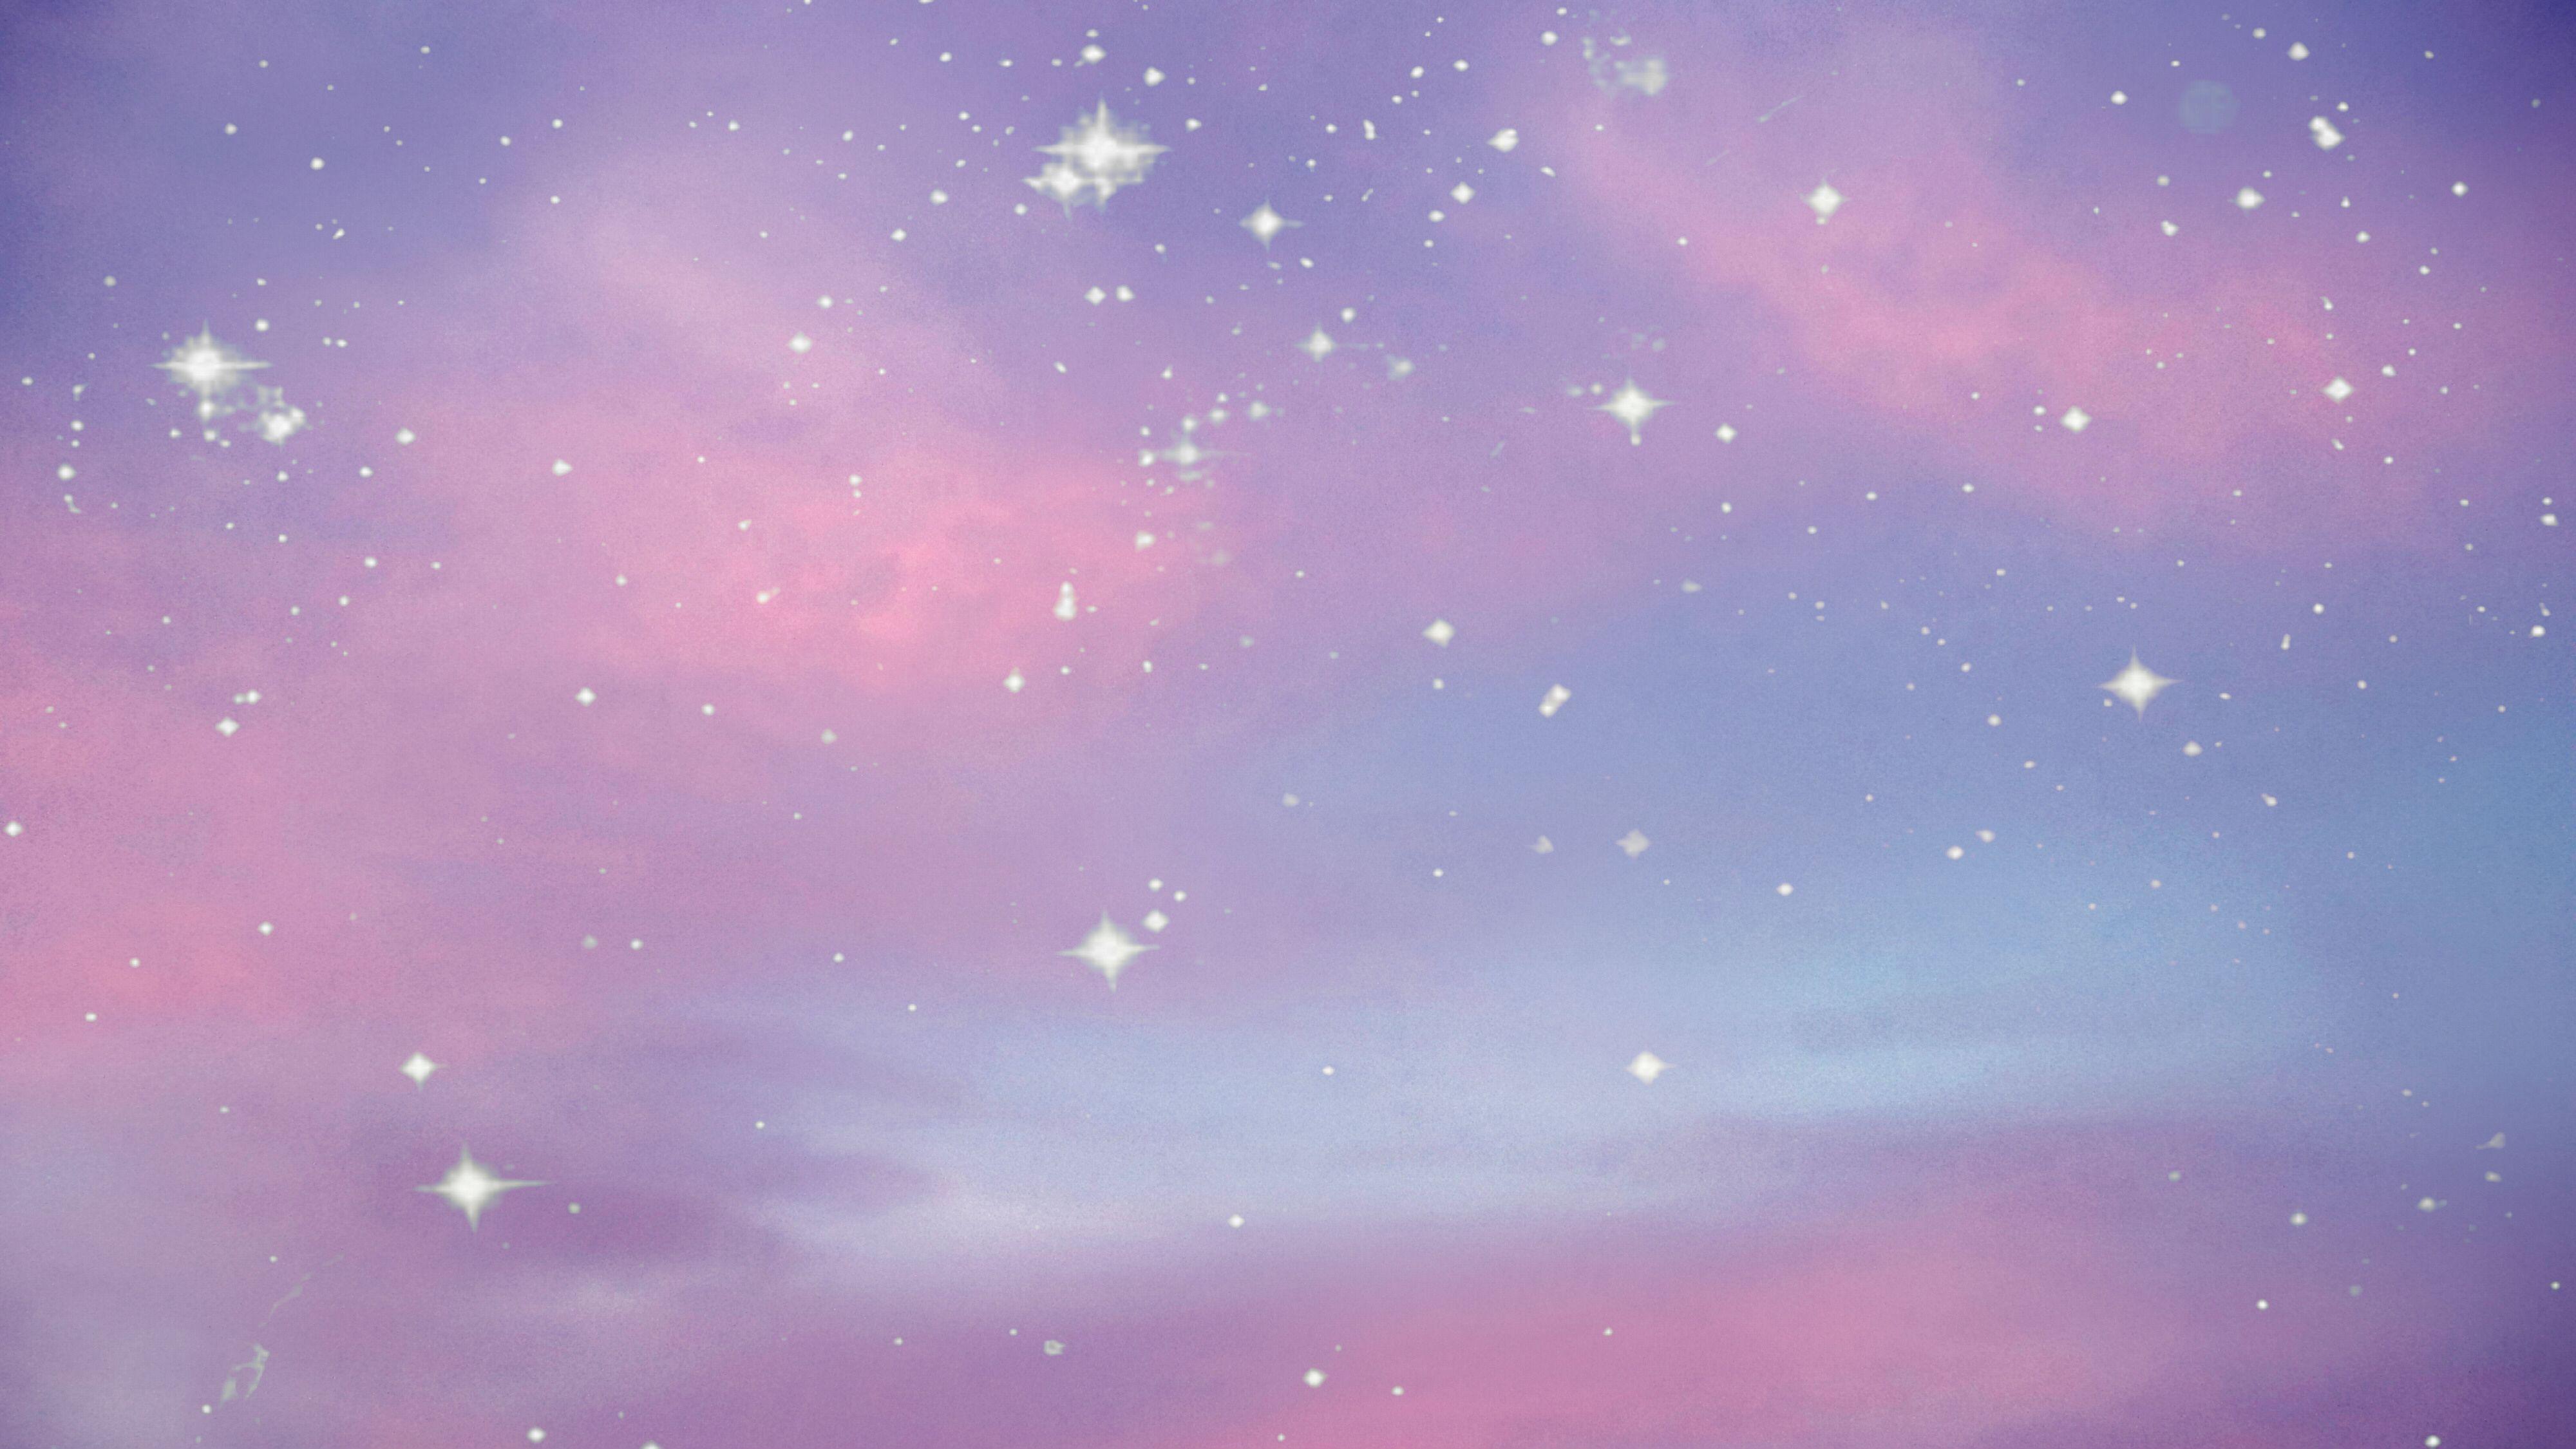 A purple and blue sky with white stars - Magic, space, galaxy